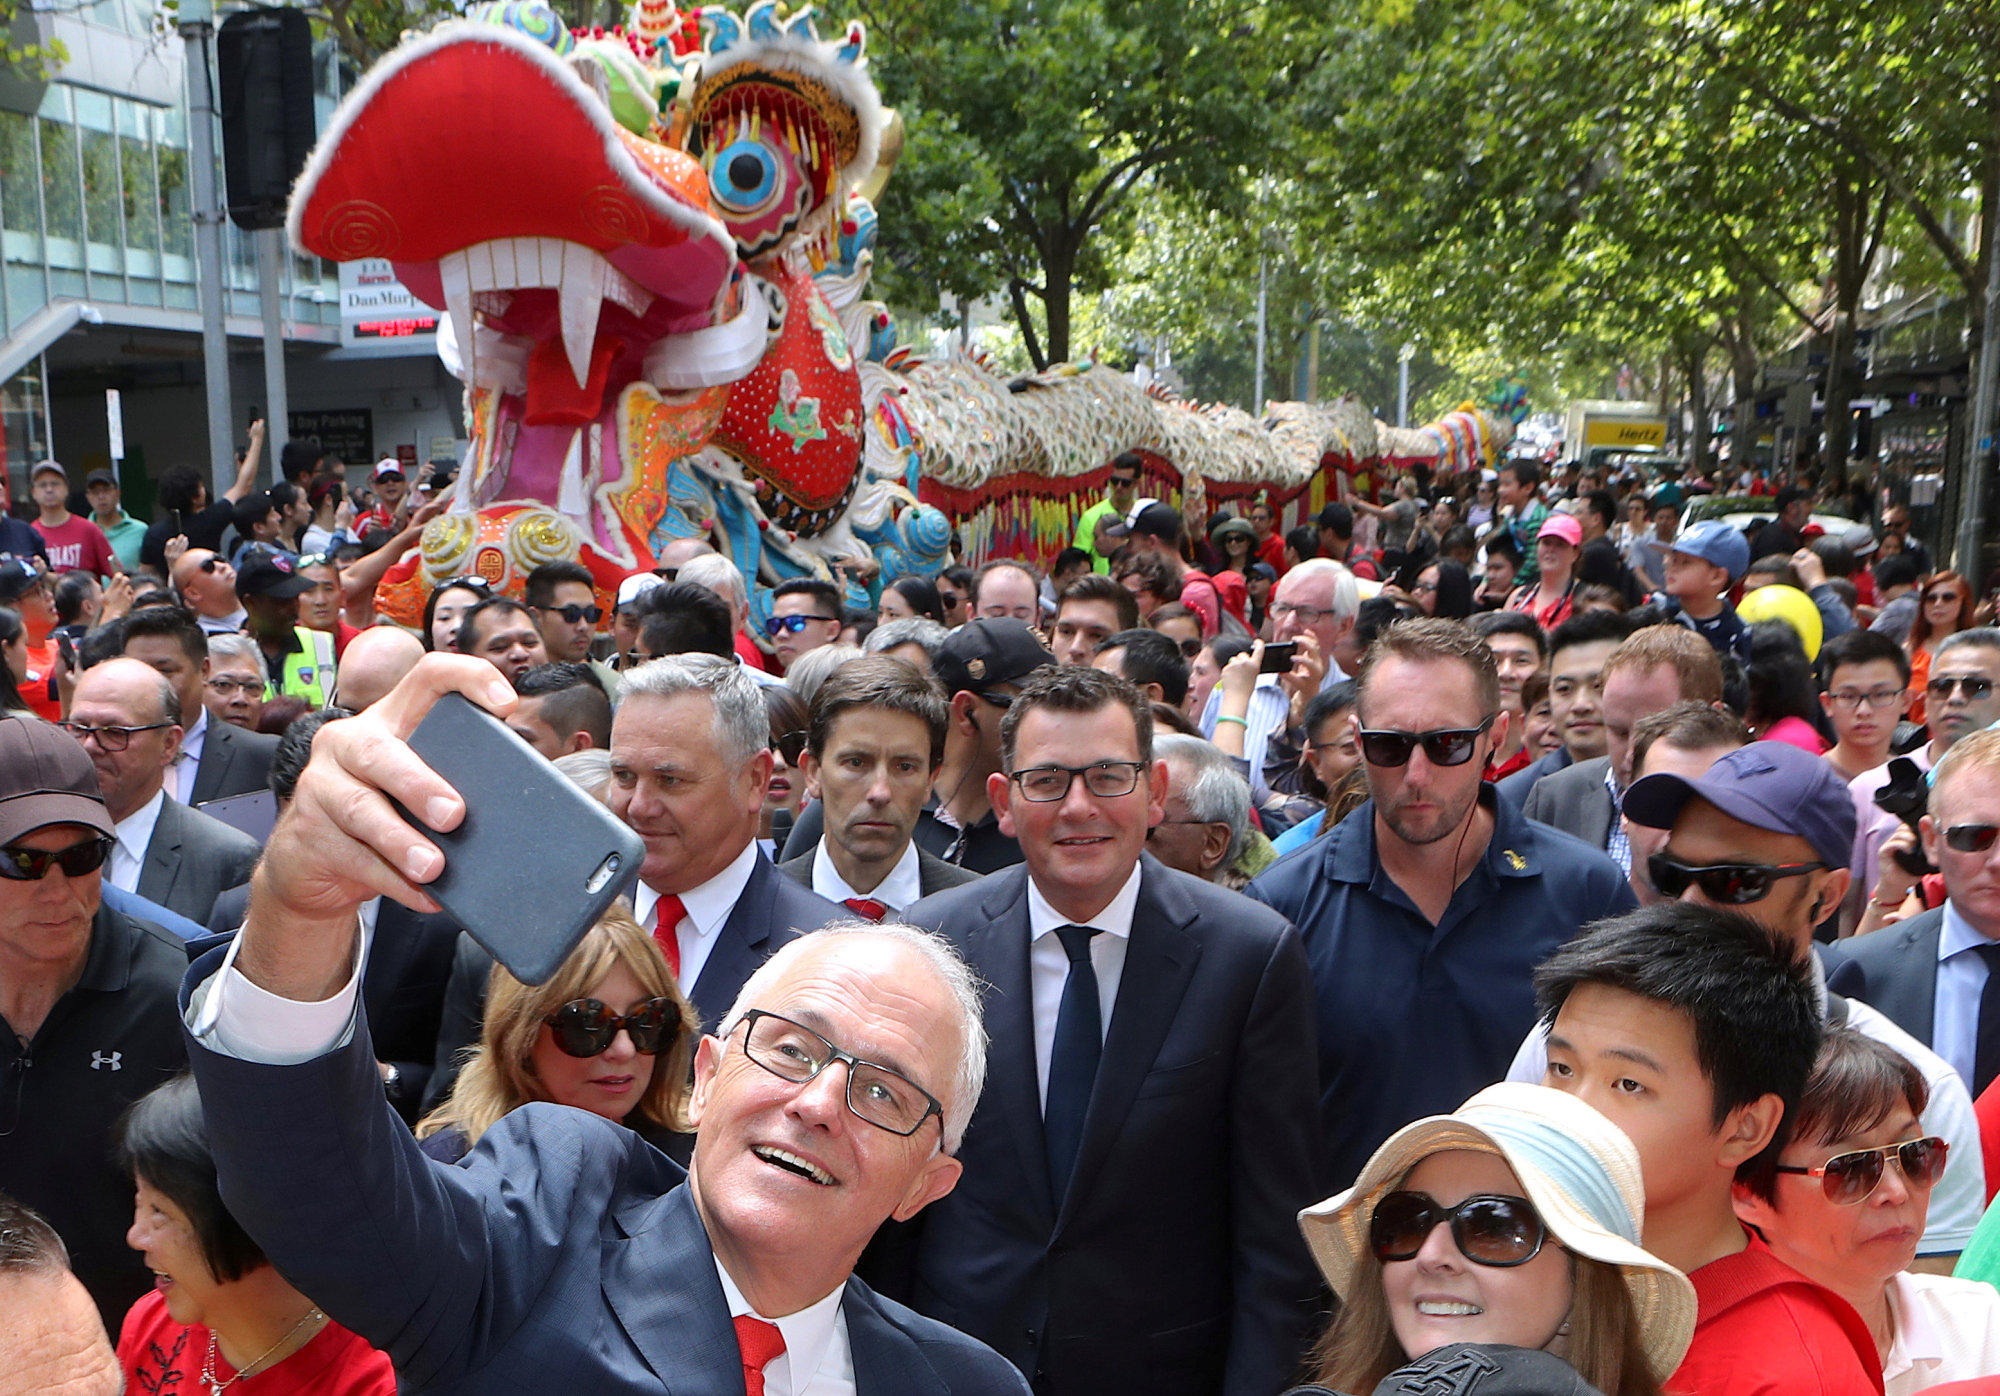 Australian Prime Minister Malcolm Turnbull takes a selfie as he walks with Victorian Premier Daniel Andrews and members of the public during a parade as part of the Chinese New Year Festival in Melbourne, Australia, Sunday. | AAP / DAVID CROSLING / VIA REUTERS